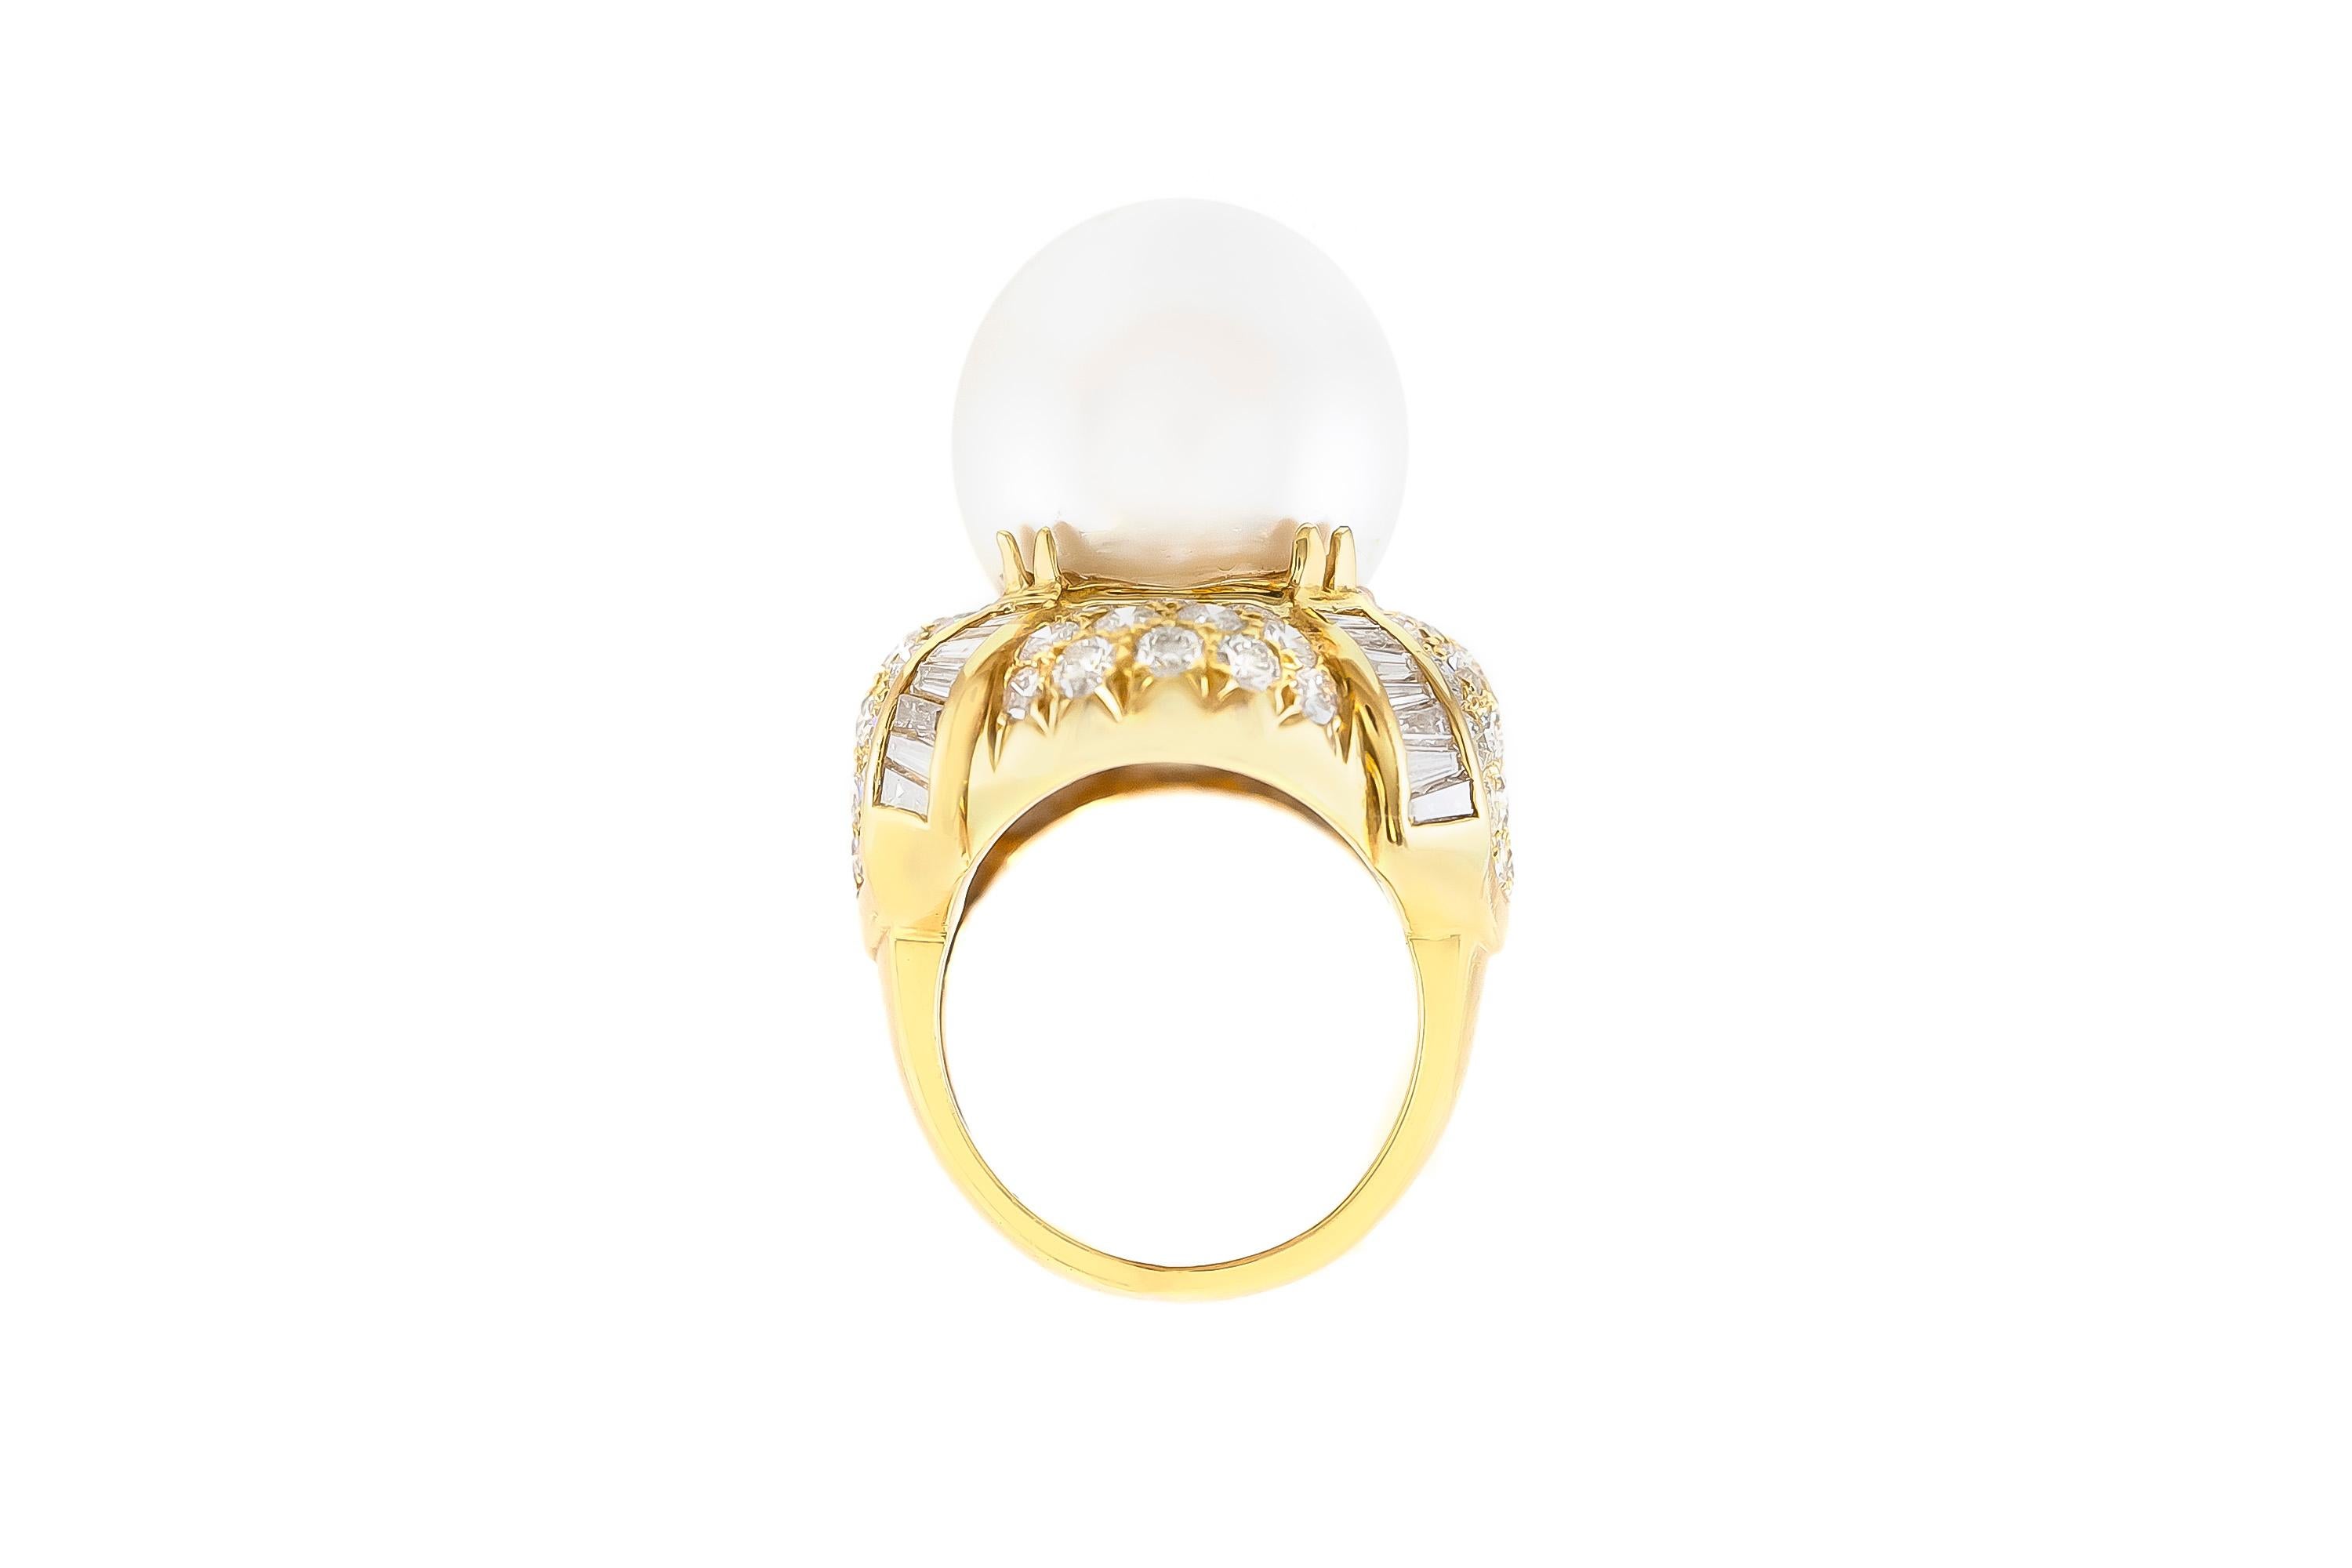 The ring is finely crafted in 18k yellow gold wih center beautiful pearl and diamonds weighing appriximately total of 7.00.
Size of the pearl 17.5-18 mm.
Circa 1980.